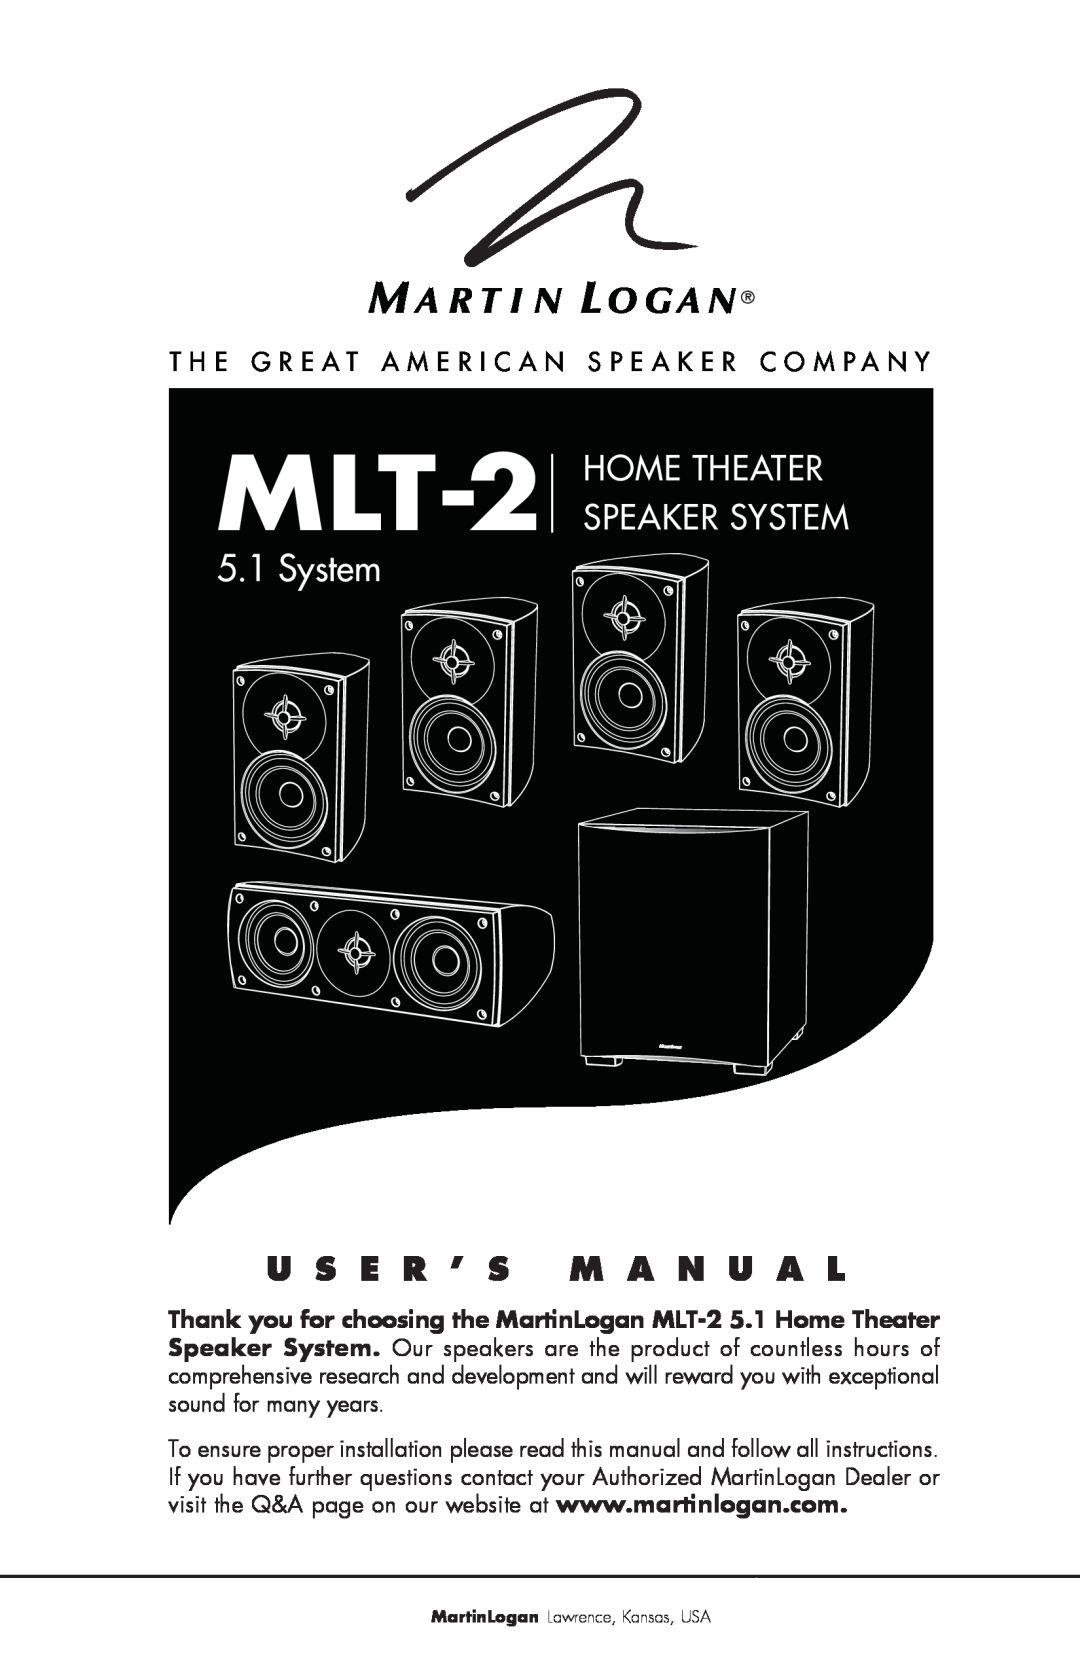 MartinLogan MLT-2 user manual U S E R ’ S M A N U A L, Home Theater Speaker System 